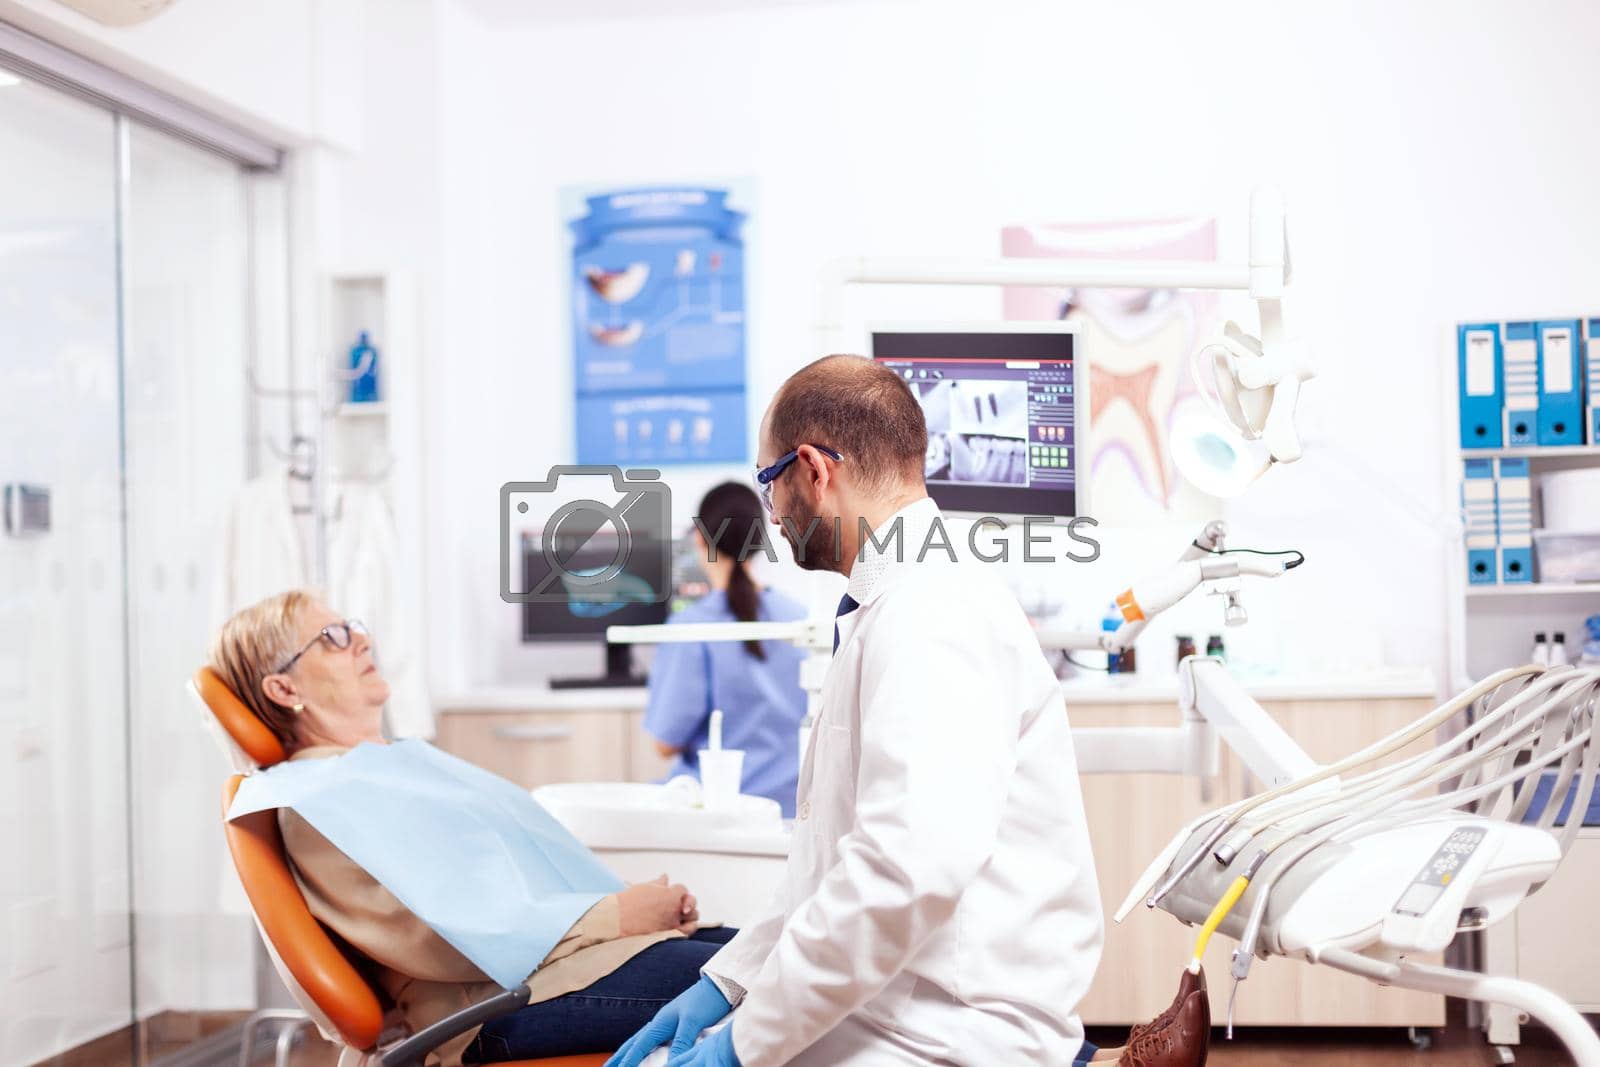 Dentist in dental clinic saying diagnostic to senior woman wearing lab coat. Medical teeth care taker talking with patient sitting on chair during consultation.